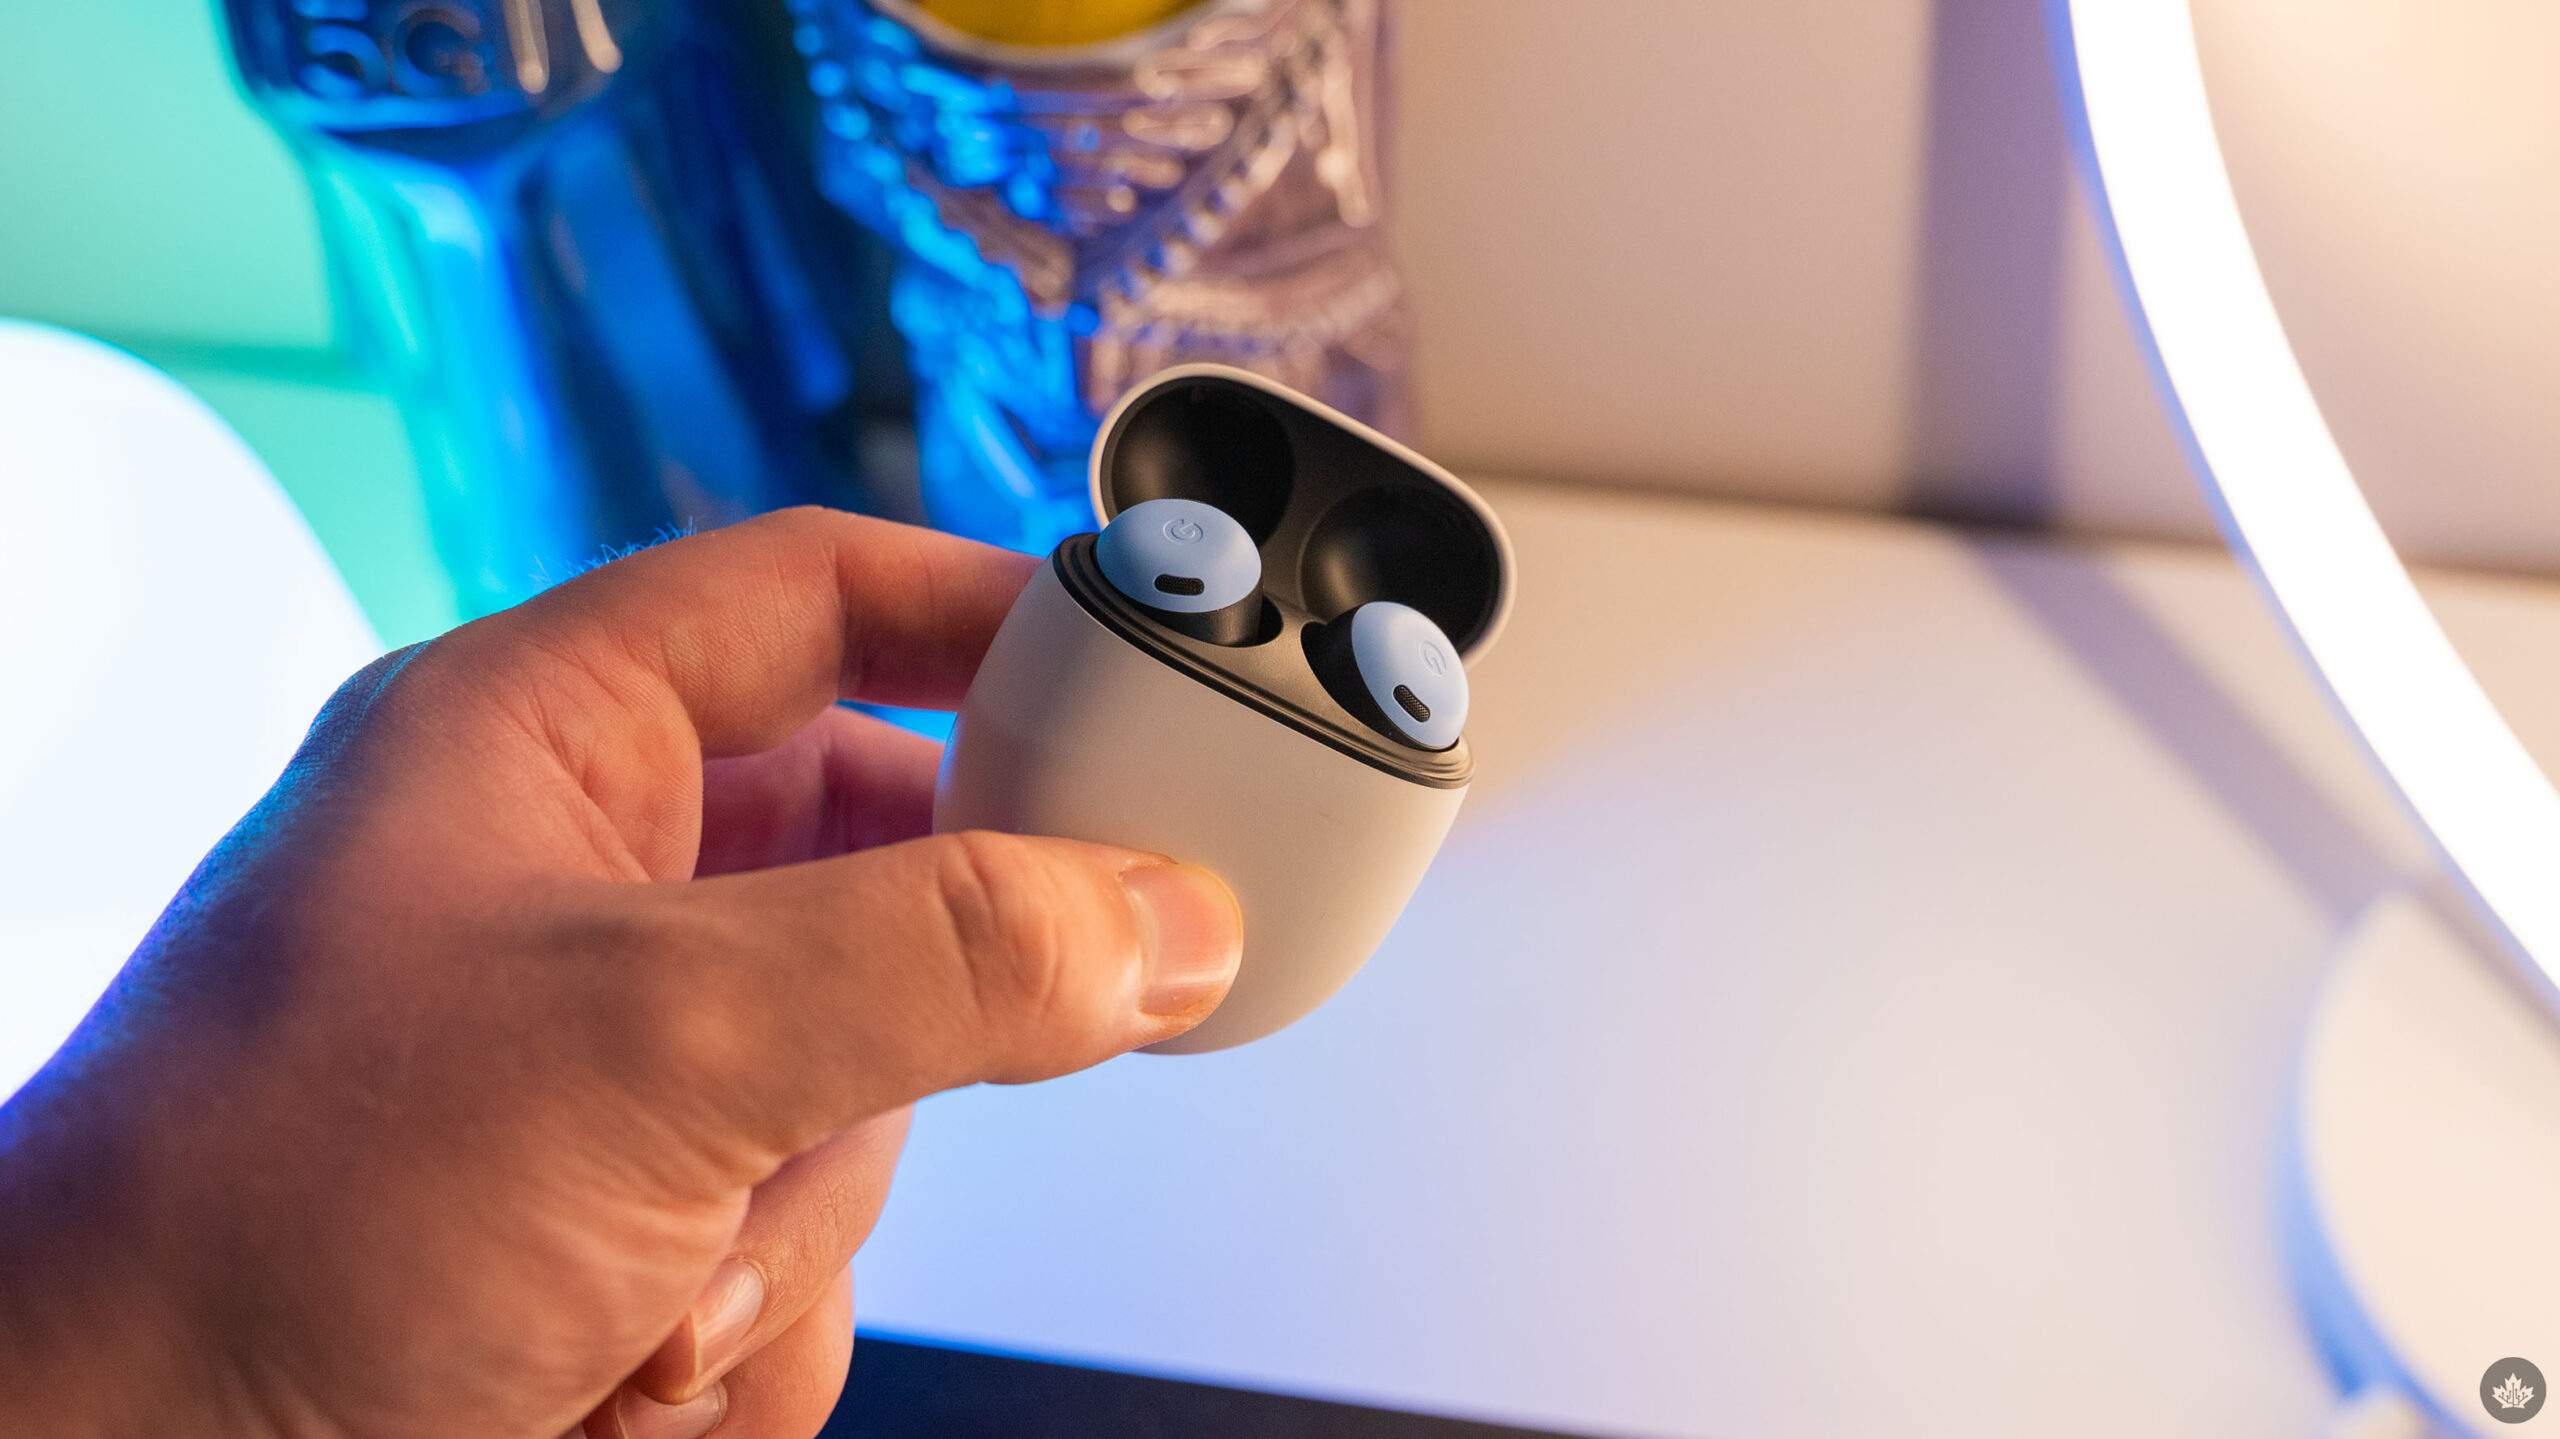 Google Pixel Buds Pro review: Great true wireless earbuds for